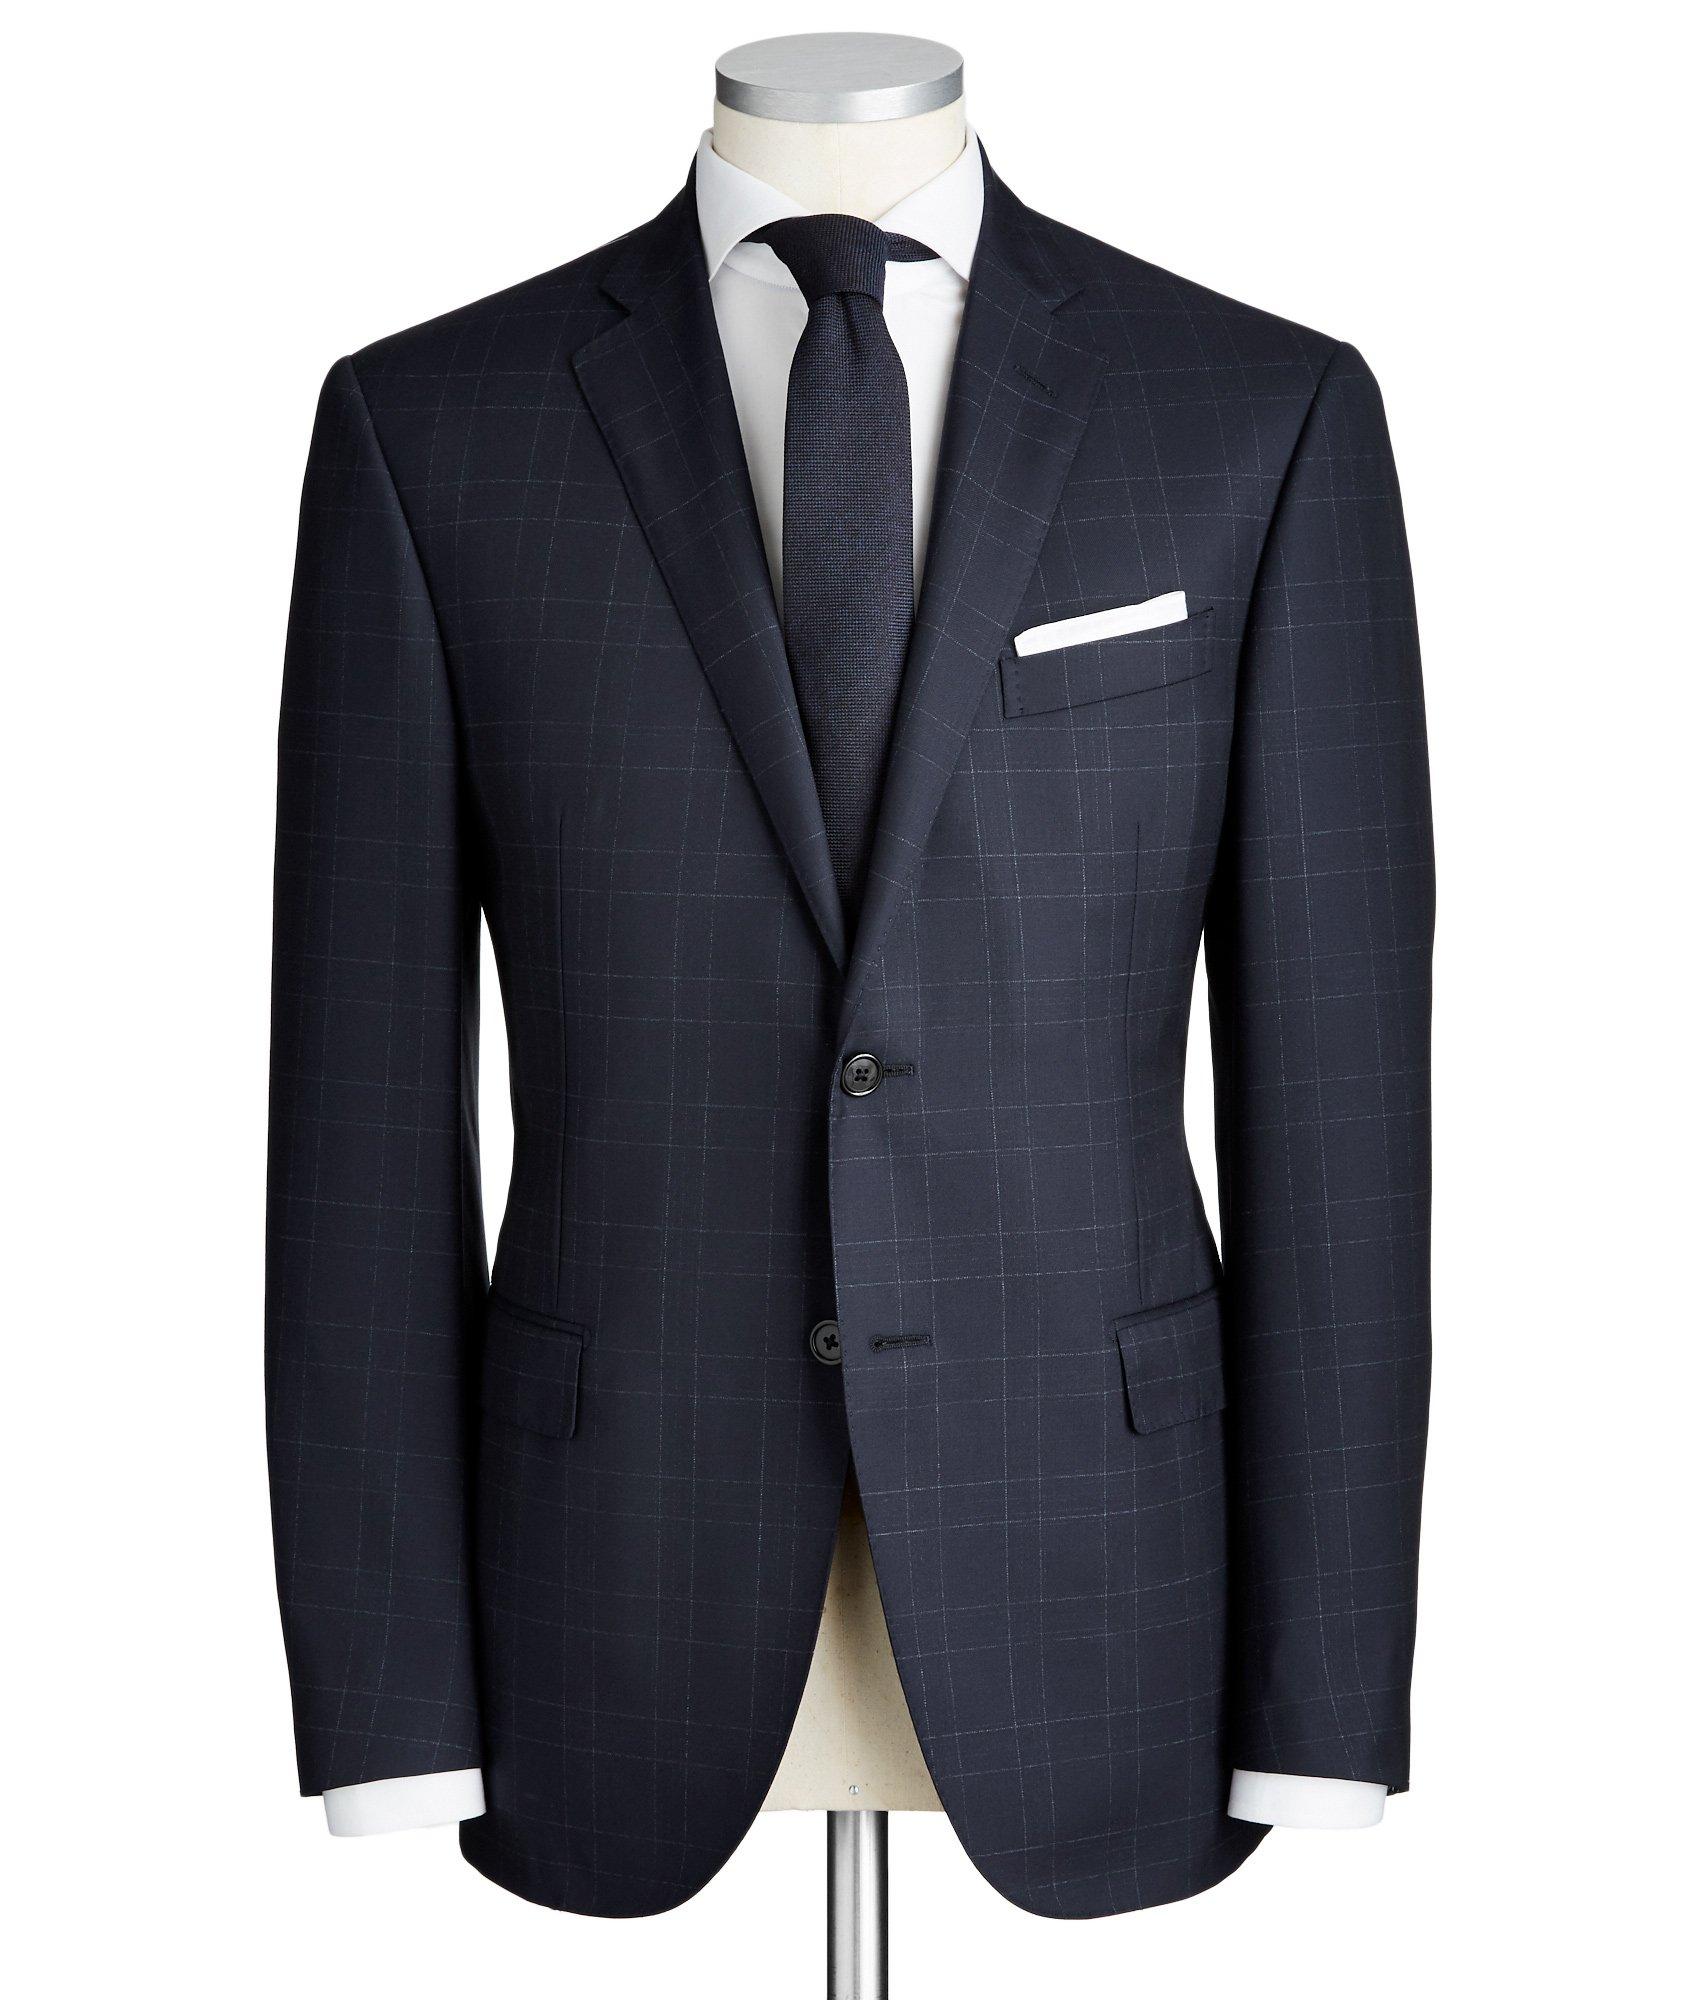 Academy Suit image 0